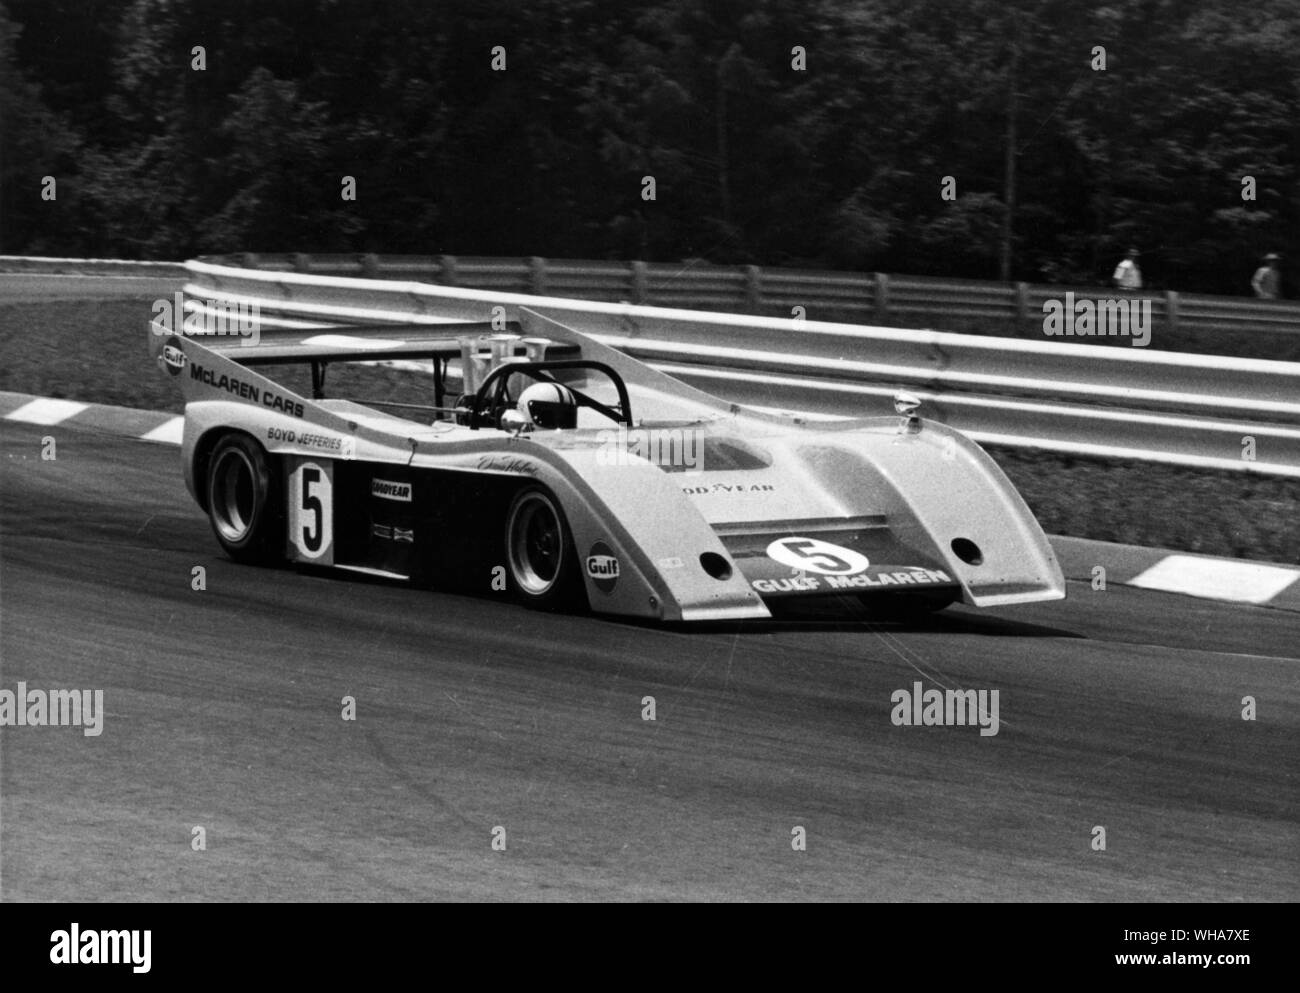 1972 McLaren Chevrolet M20 Can-Am sports car. Denny Hulme at the wheel Stock Photo